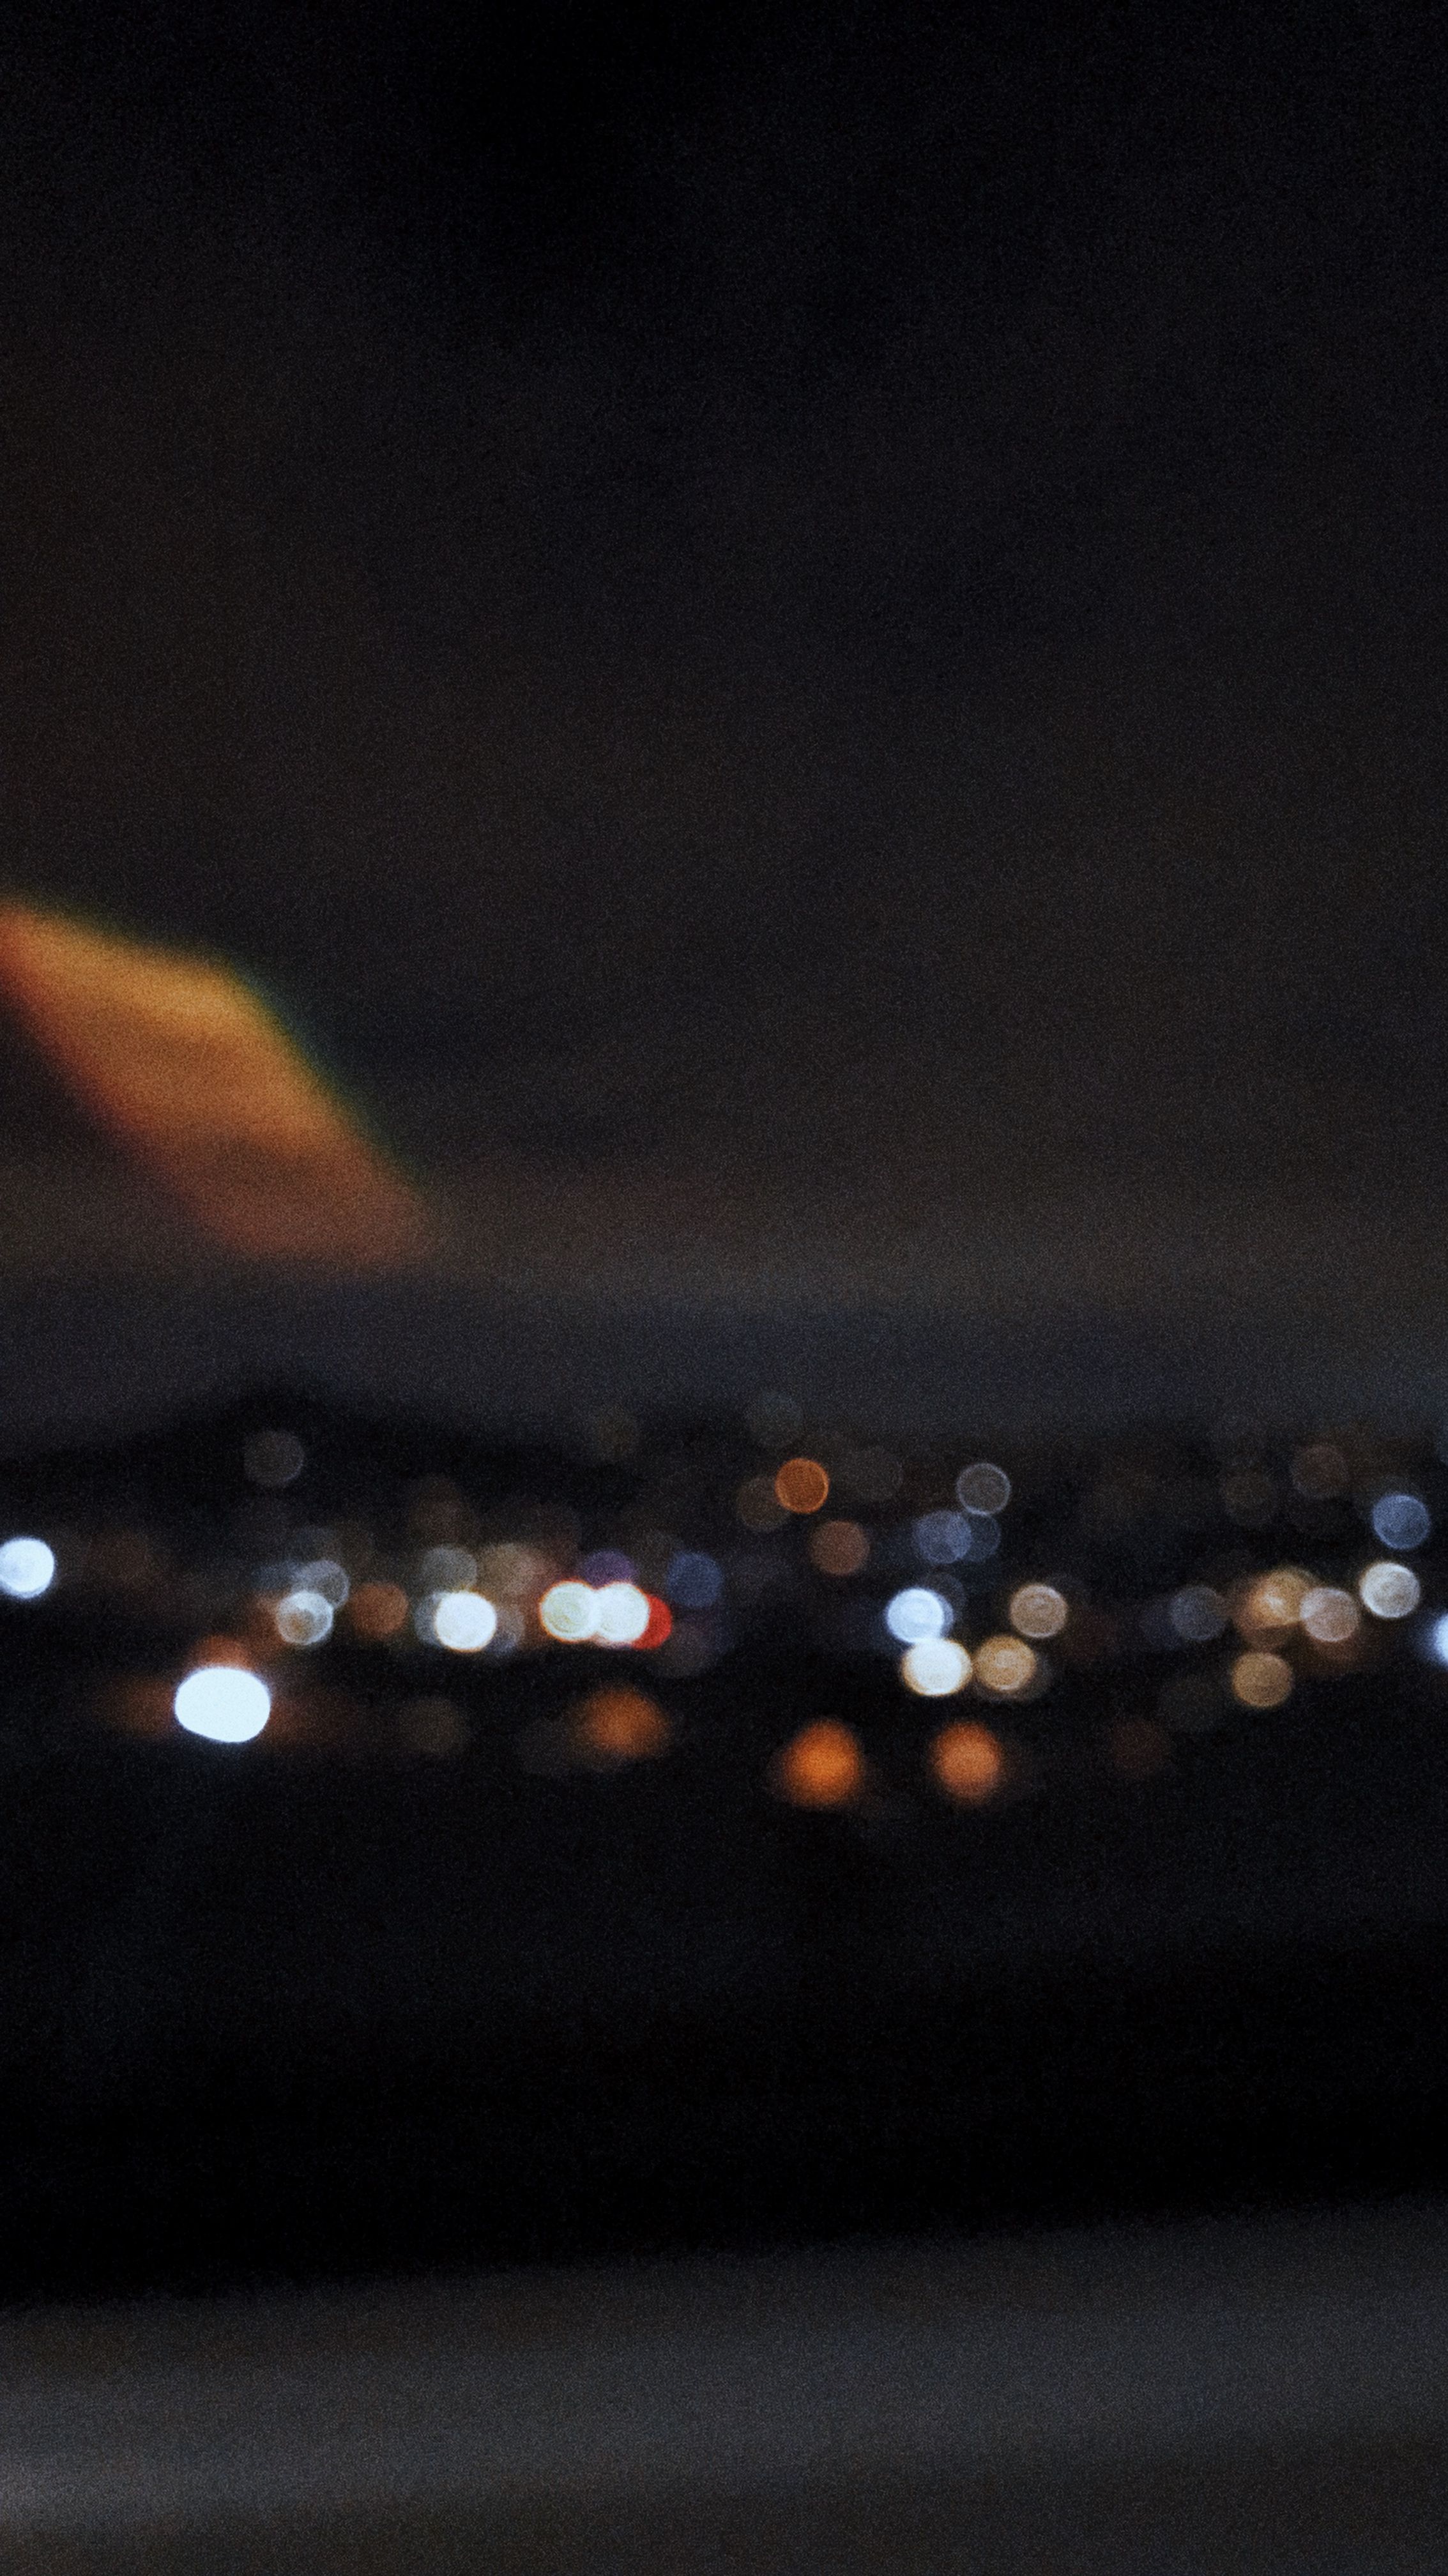 A blurry image of a city at night with lights shining in the distance. - Blurry